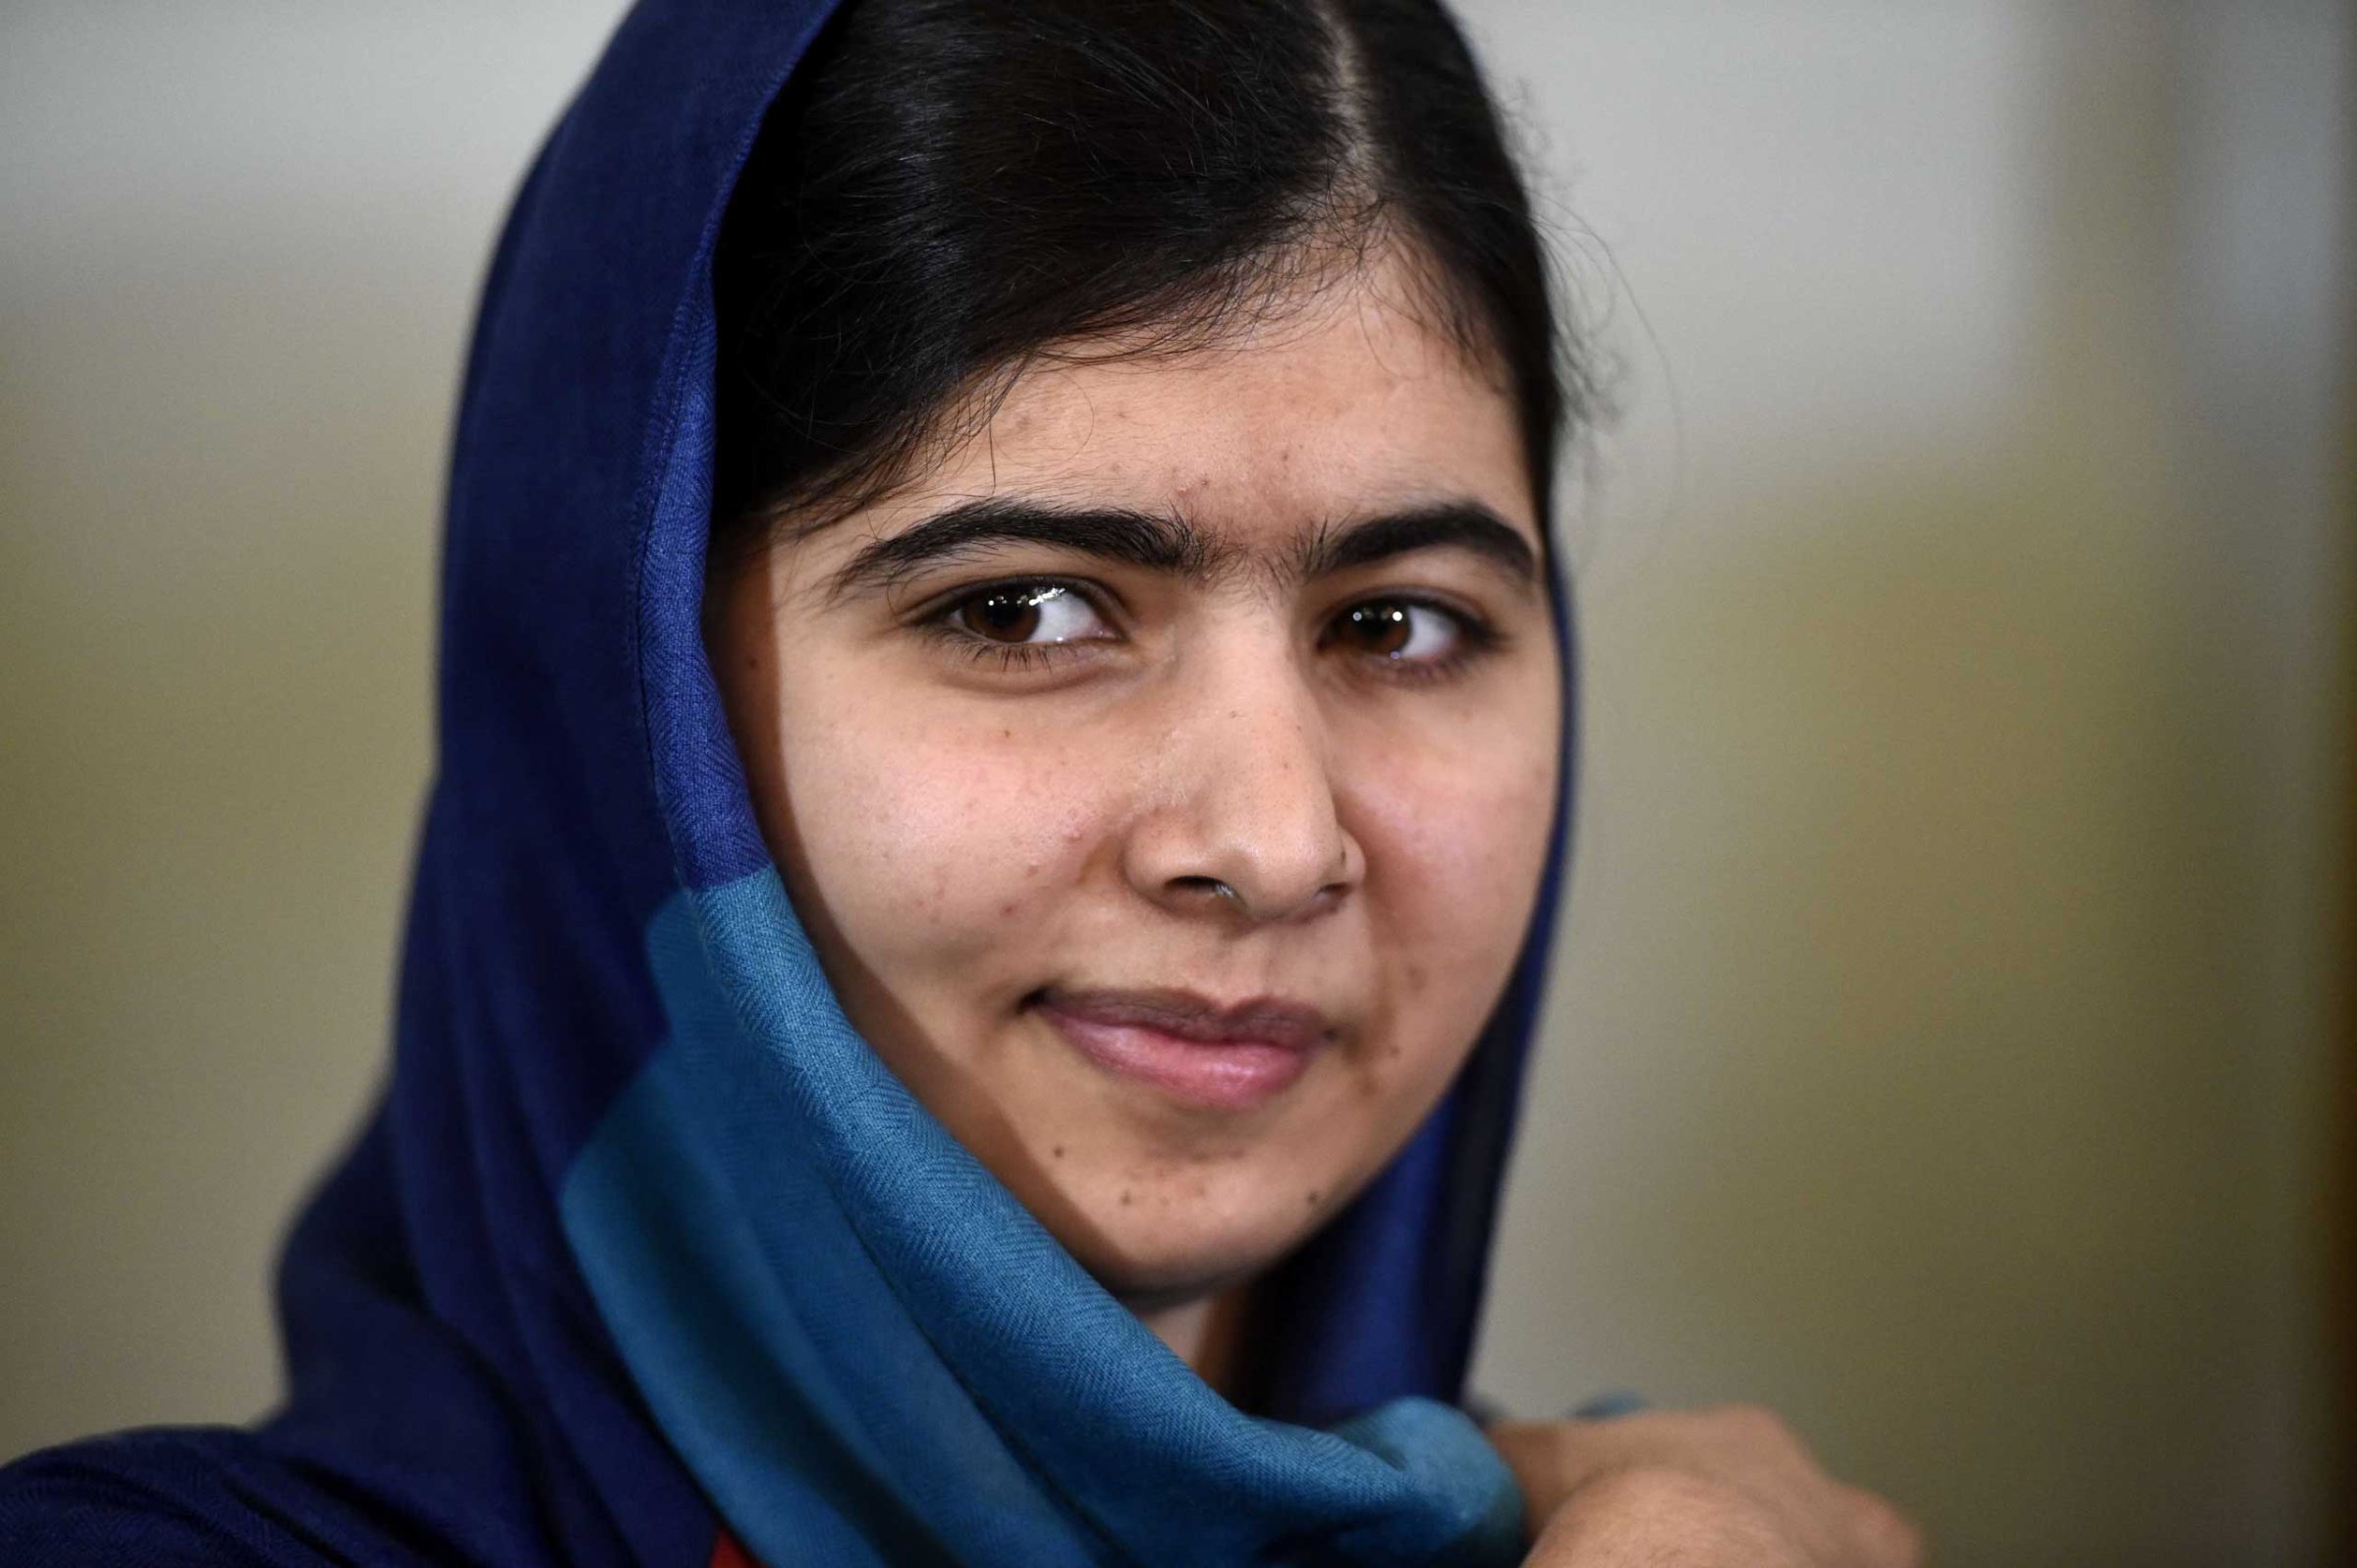 Nobel Peace Prize laureate Malala Yousafzai attends a press conference on Dec. 9, 2014 at the Norwegian Nobel Institute in Oslo ahead of the ceremony to present her with the award.